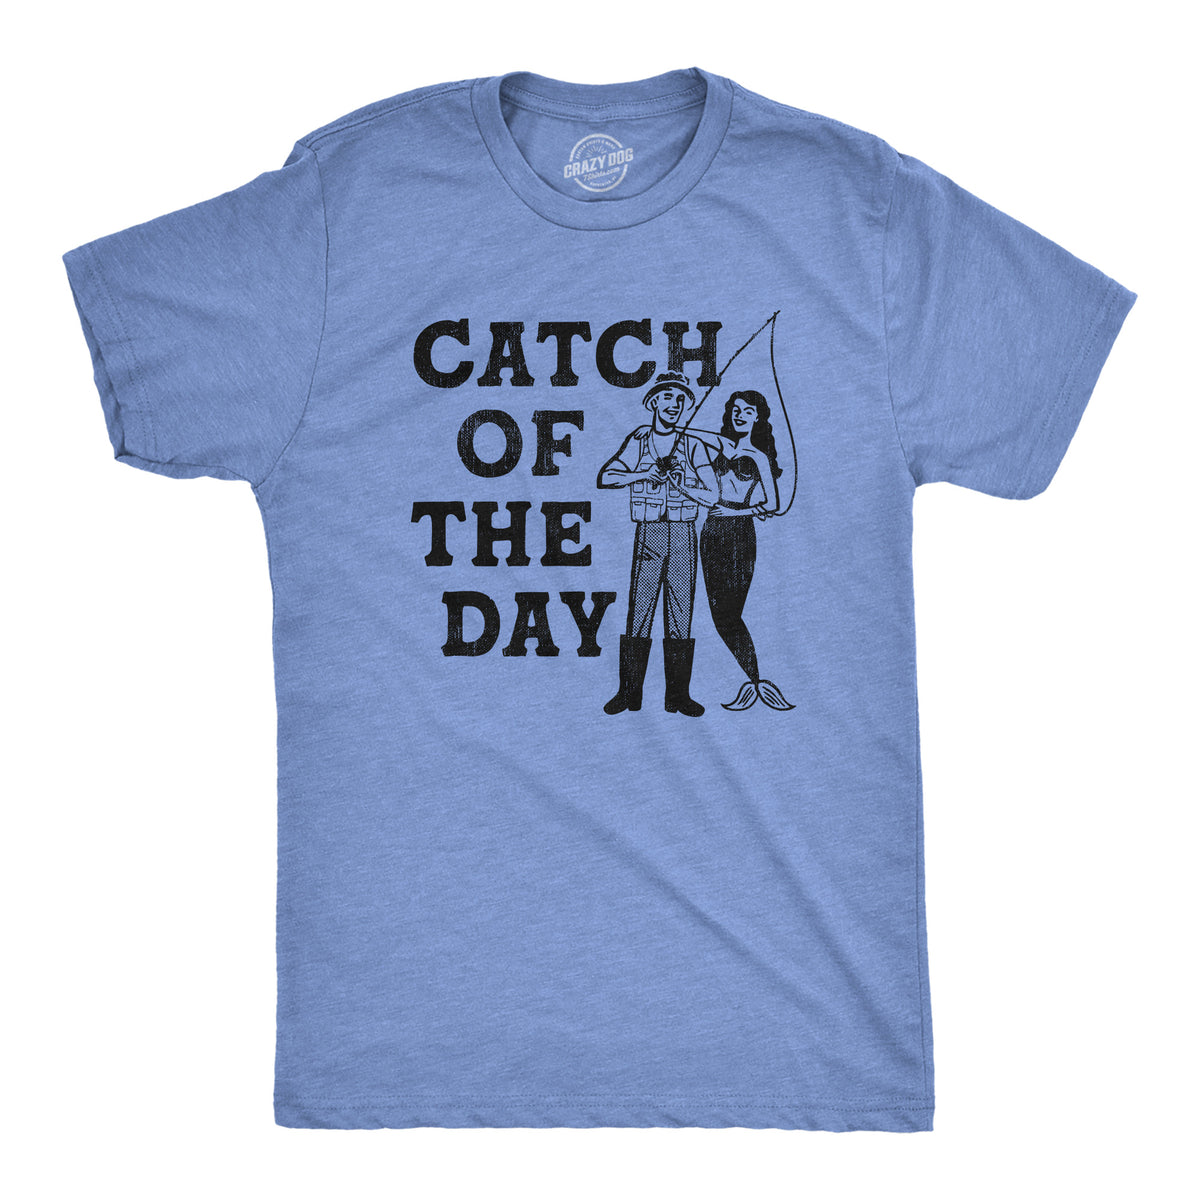 Funny Light Heather Blue - Catch Catch Of The Day Mens T Shirt Nerdy Fishing Sarcastic Tee